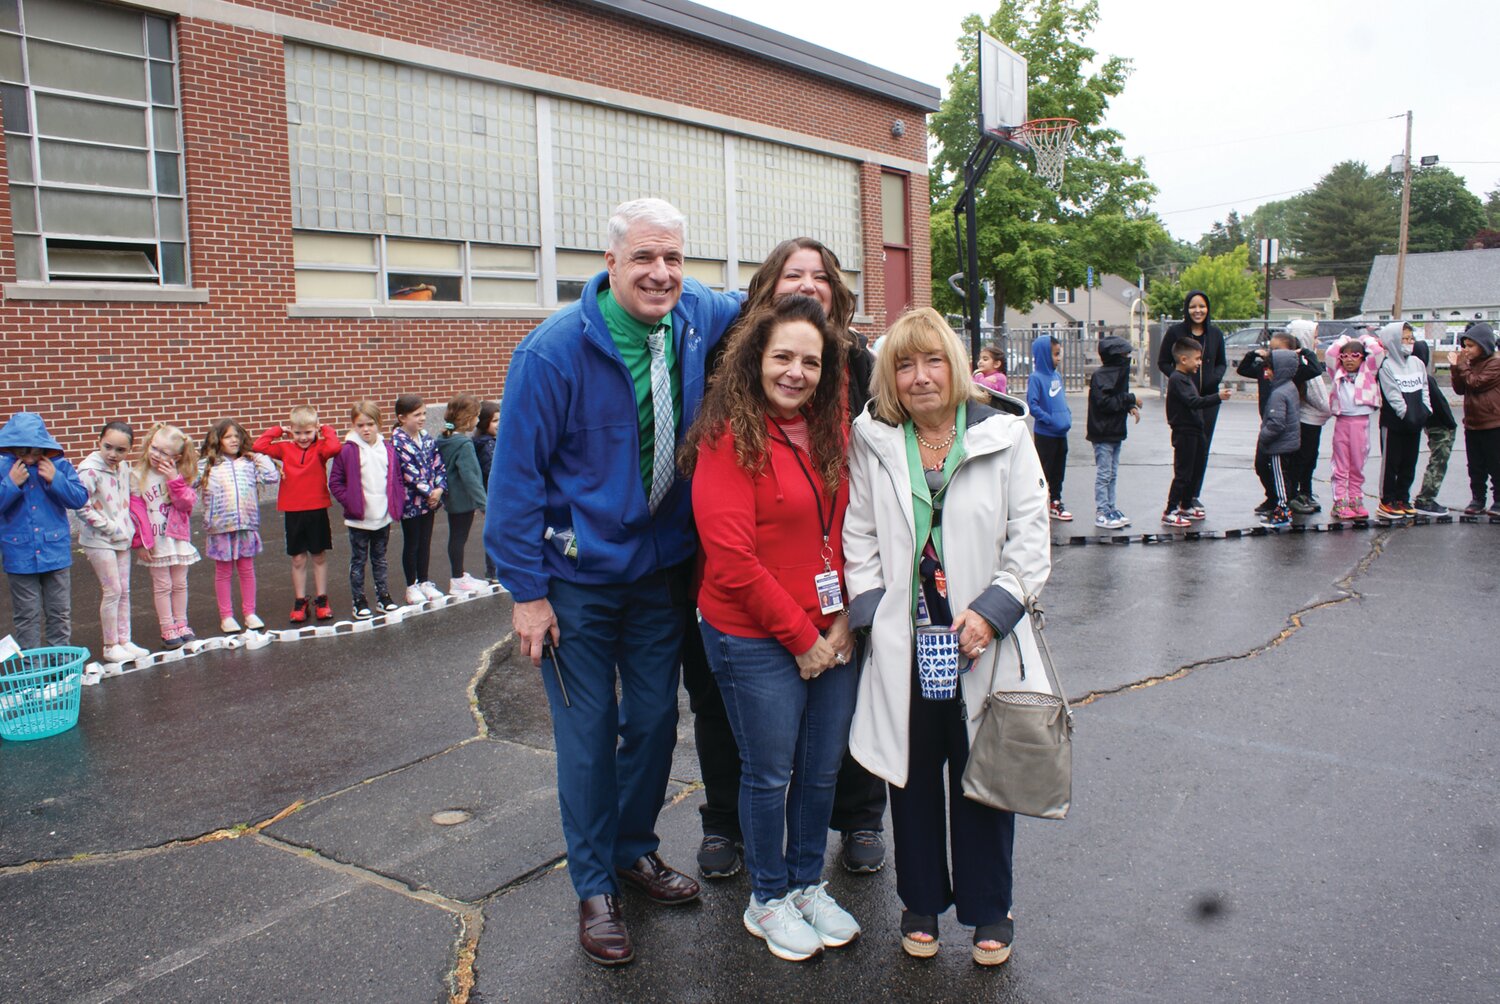 IMPRESSED MAYBE? Principal James Zanfini joins Scappaticca and Vessella along with  Assistant Superintendent Nora Cole (right) who just had to come see this amazing display of kindness come to fruition. (Photo by Steve Popiel)